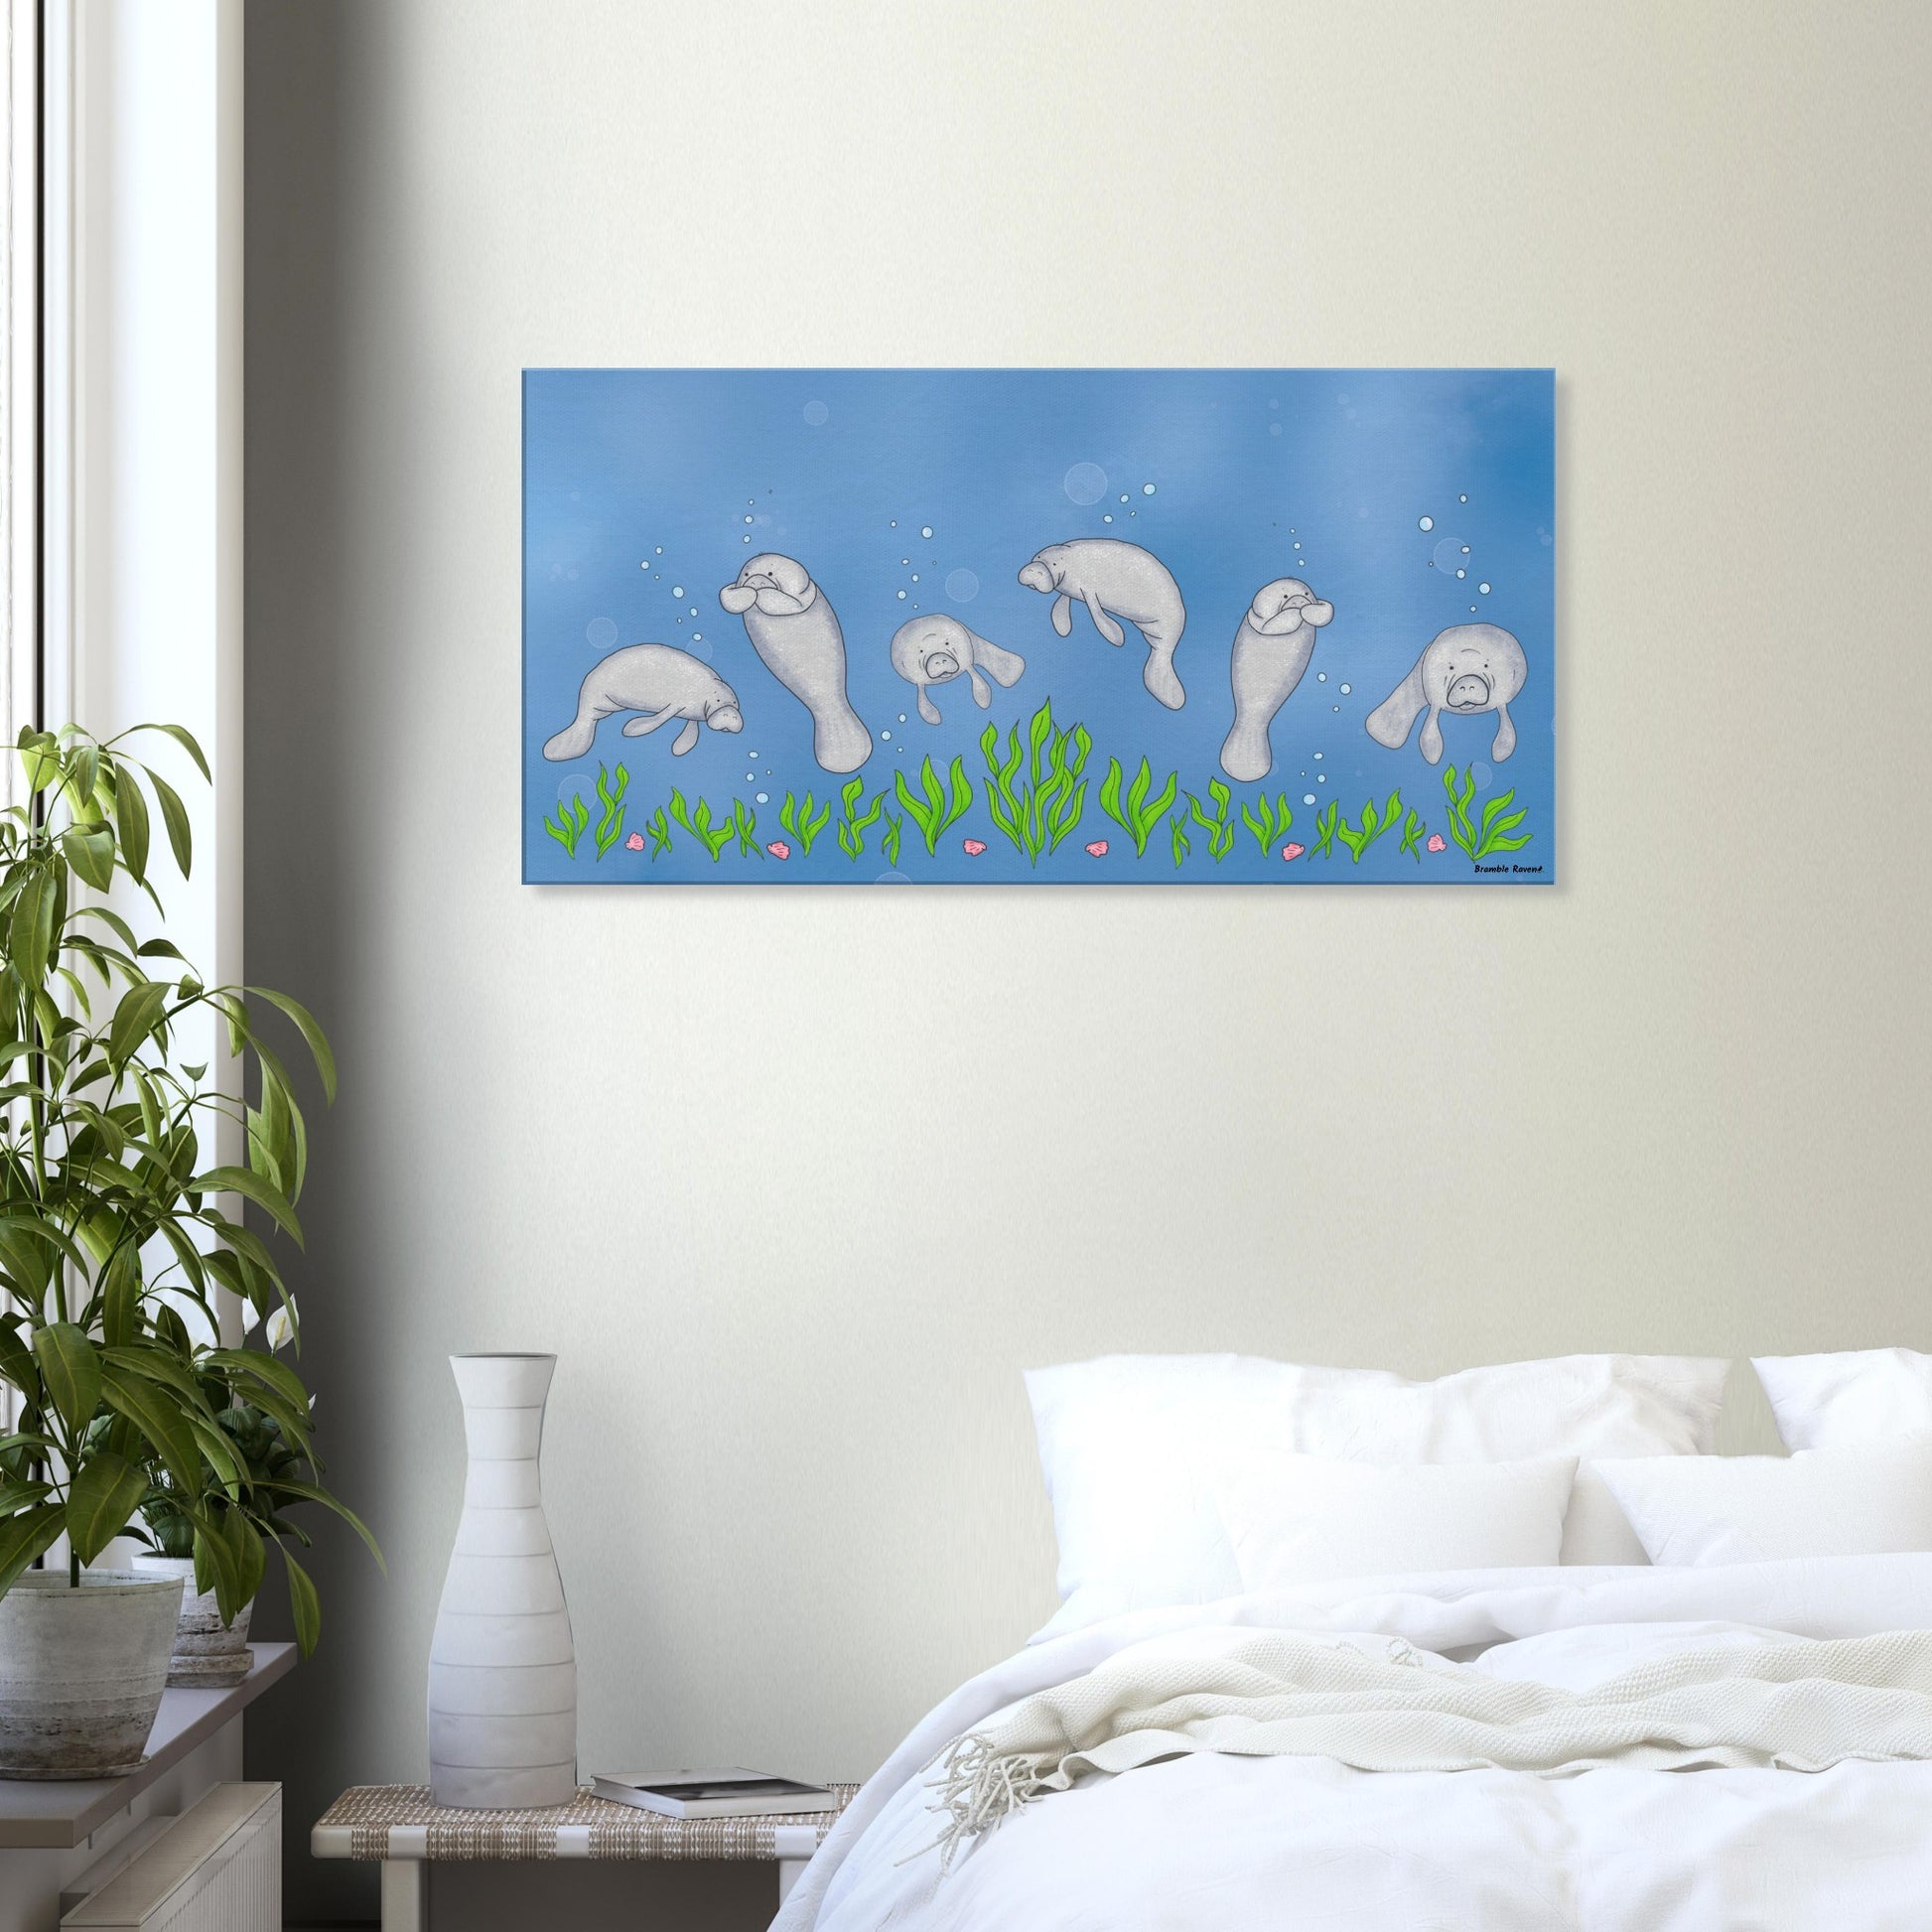 20 by 40 inch slim canvas wall art print featuring cute illustrated manatees swimming above the seabed.  Shown on wall above white bedding, side table, and potted plant.